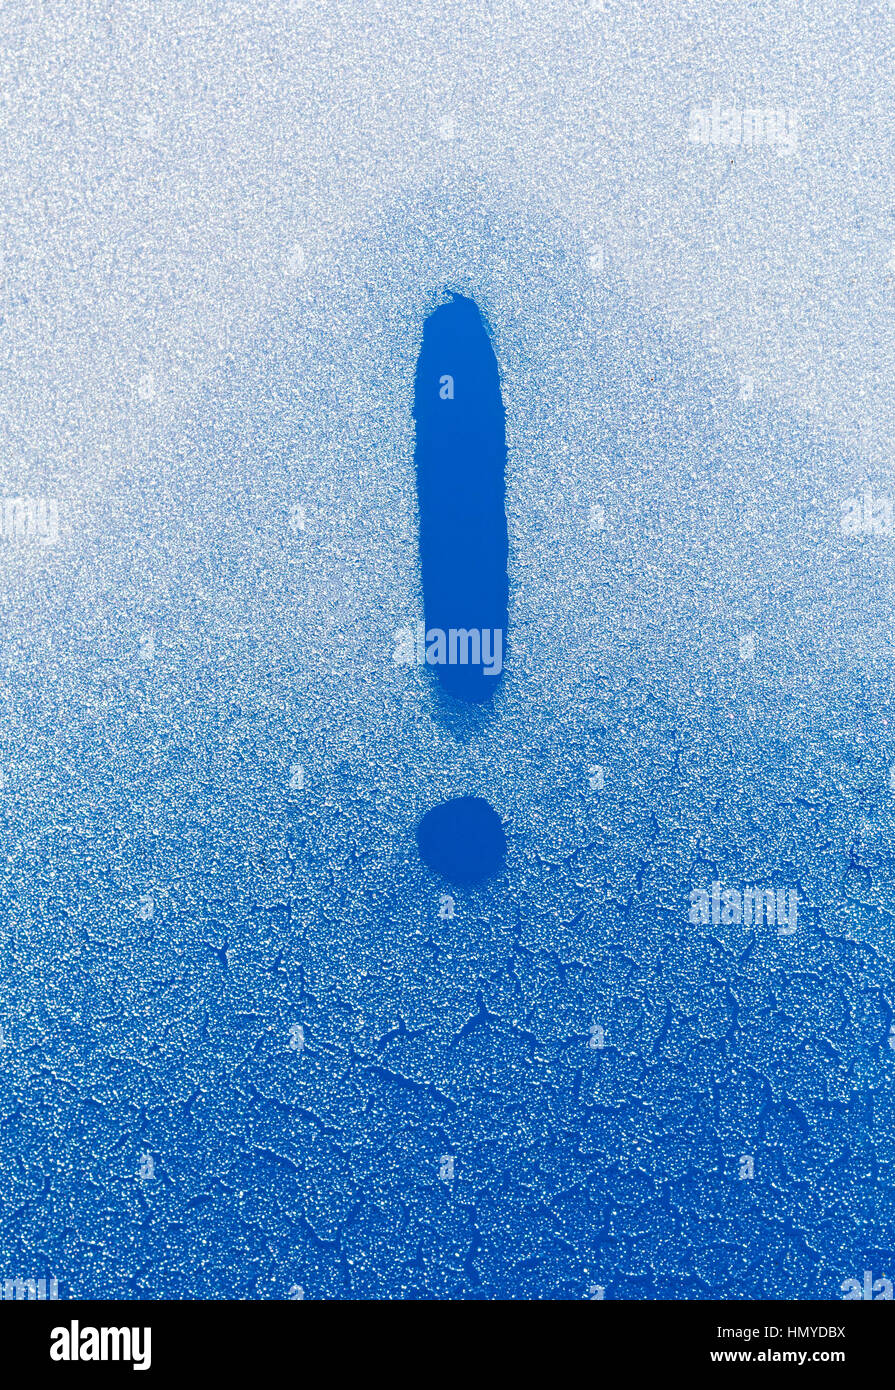 Exclamation mark written in a frozen glass against blue sky Stock Photo